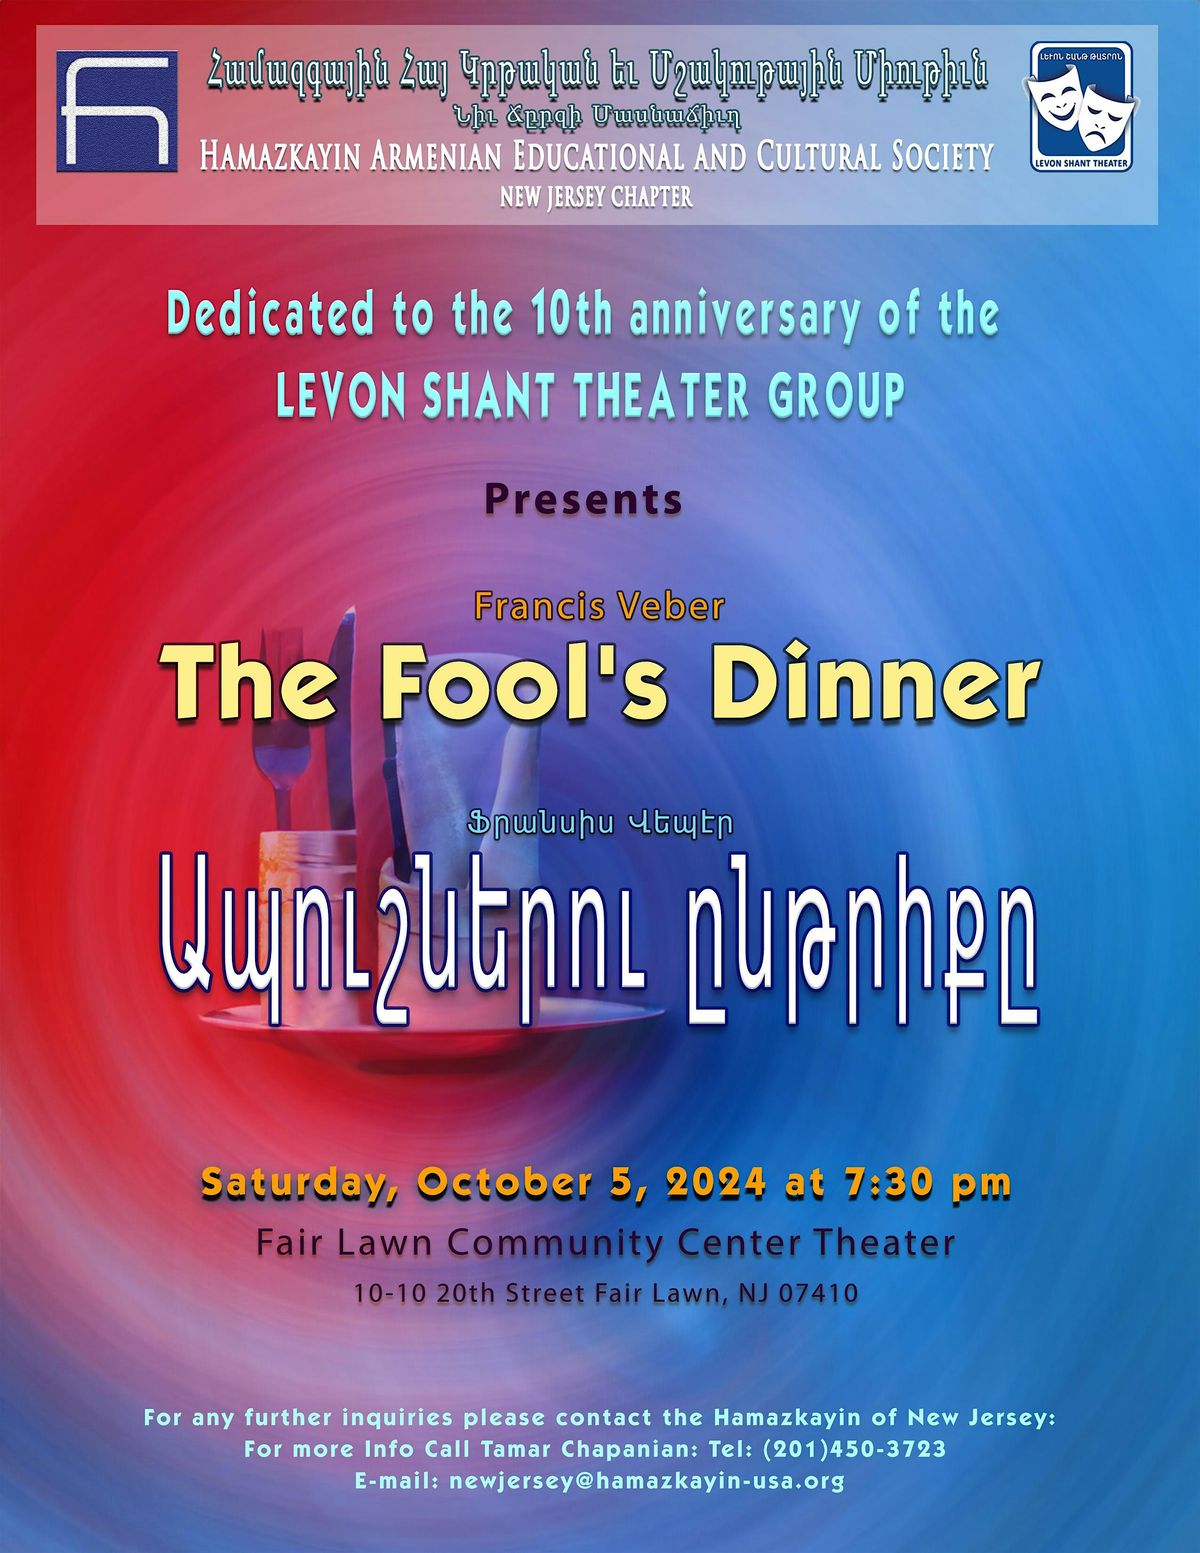 The Fool's Dinner - 10th anniversary of Levon Shant Theater Group